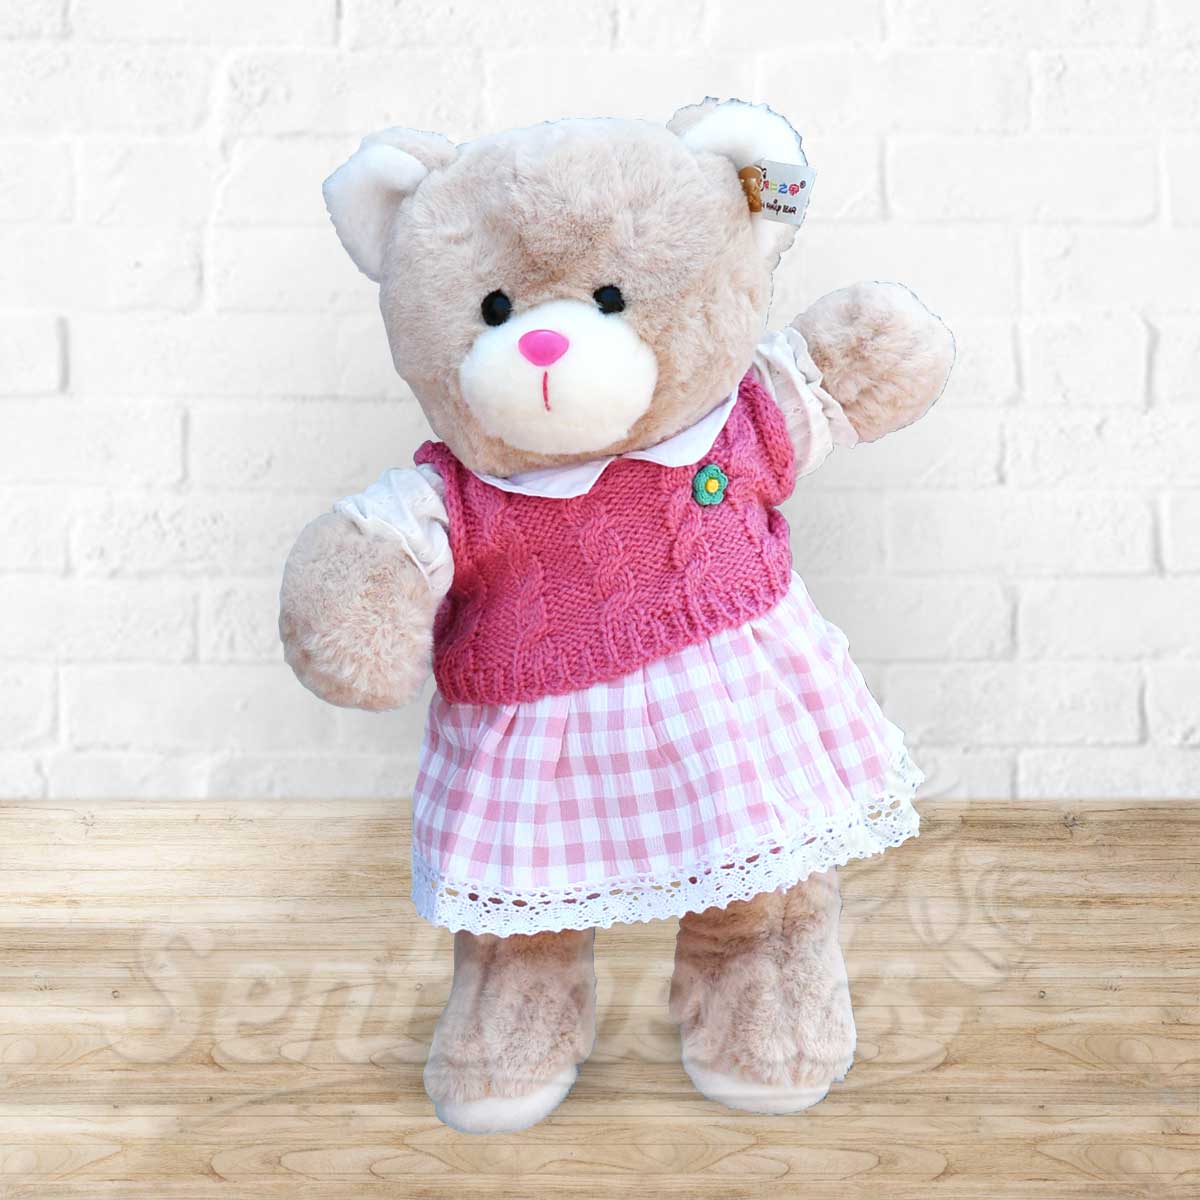 Baby Pink Teddy  - Dress-up